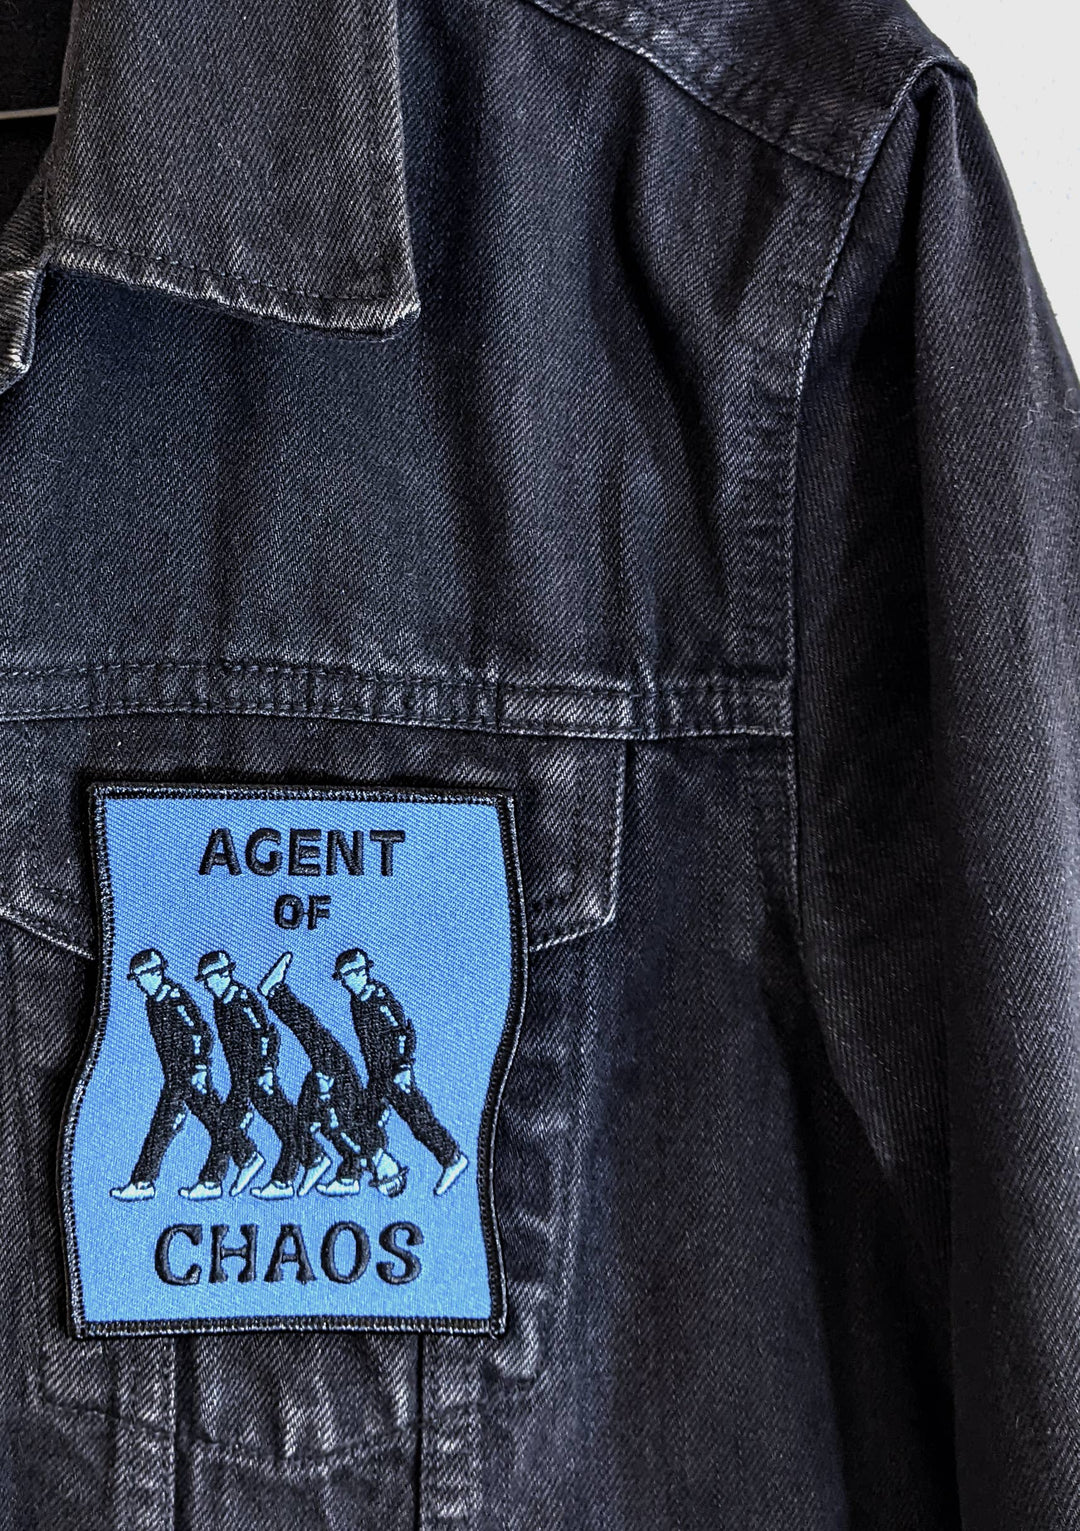 Badaboom - Agent of Chaos Patch